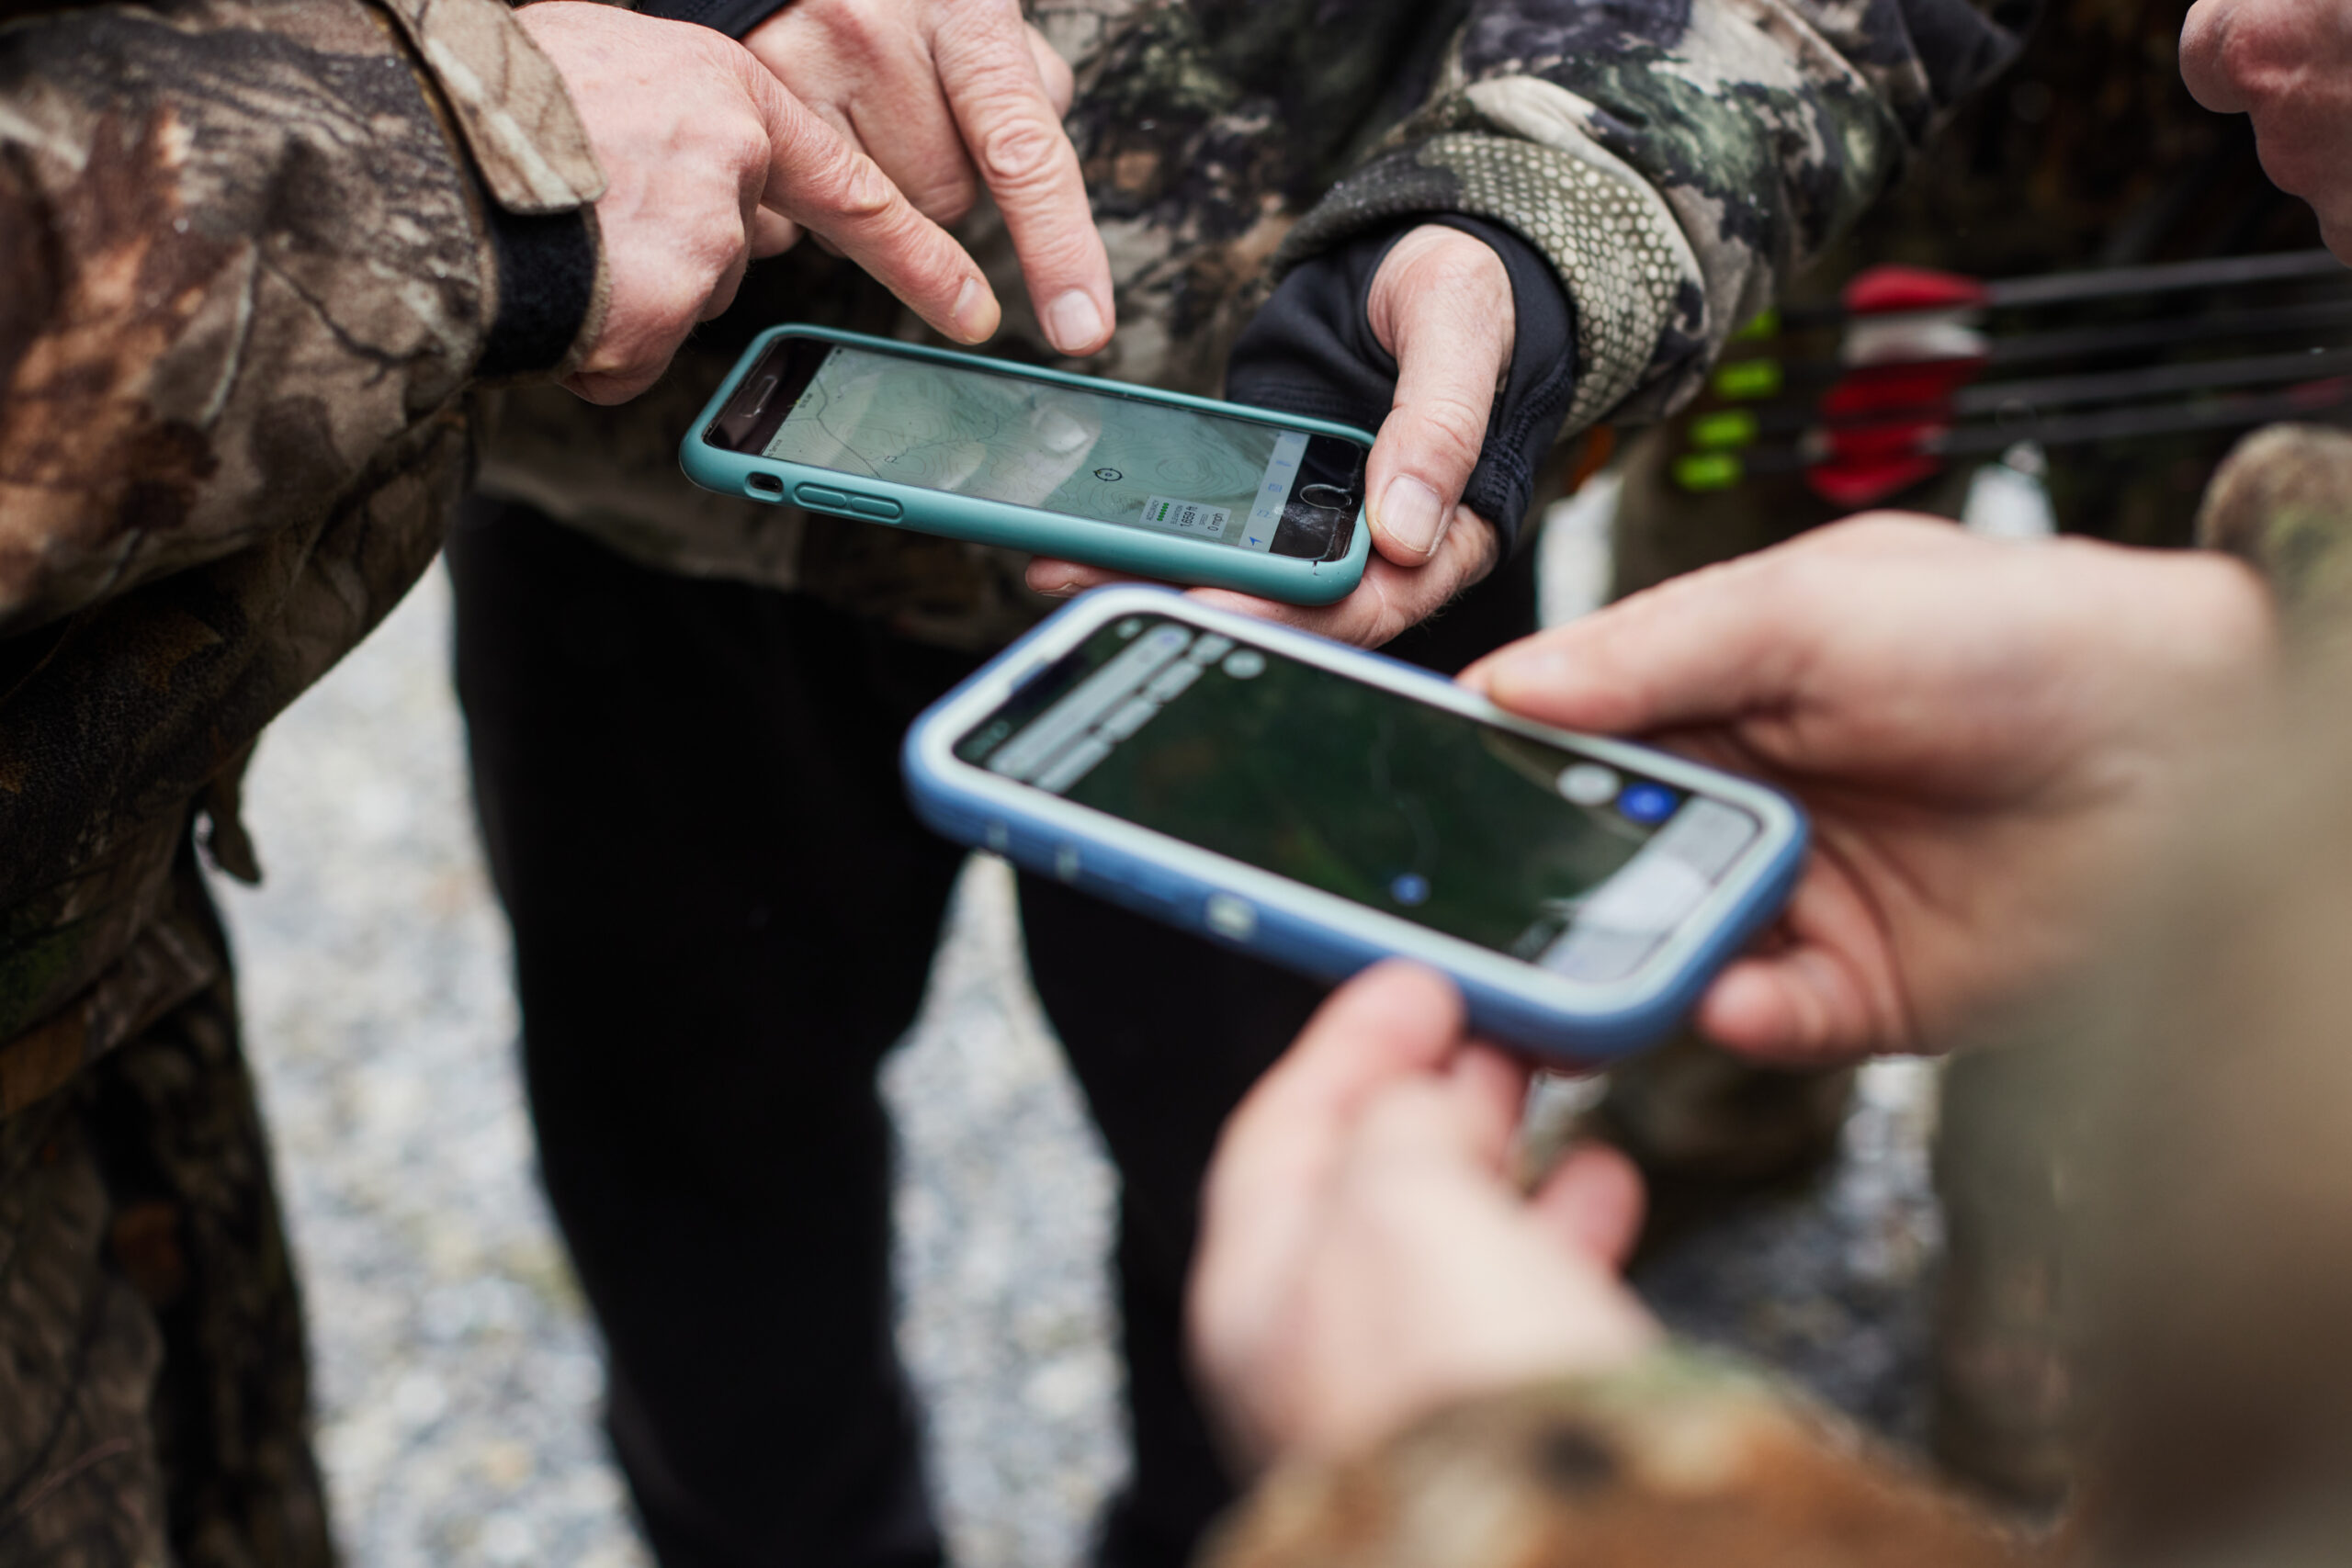 Hunters look at their phones while deciding where to hunt.